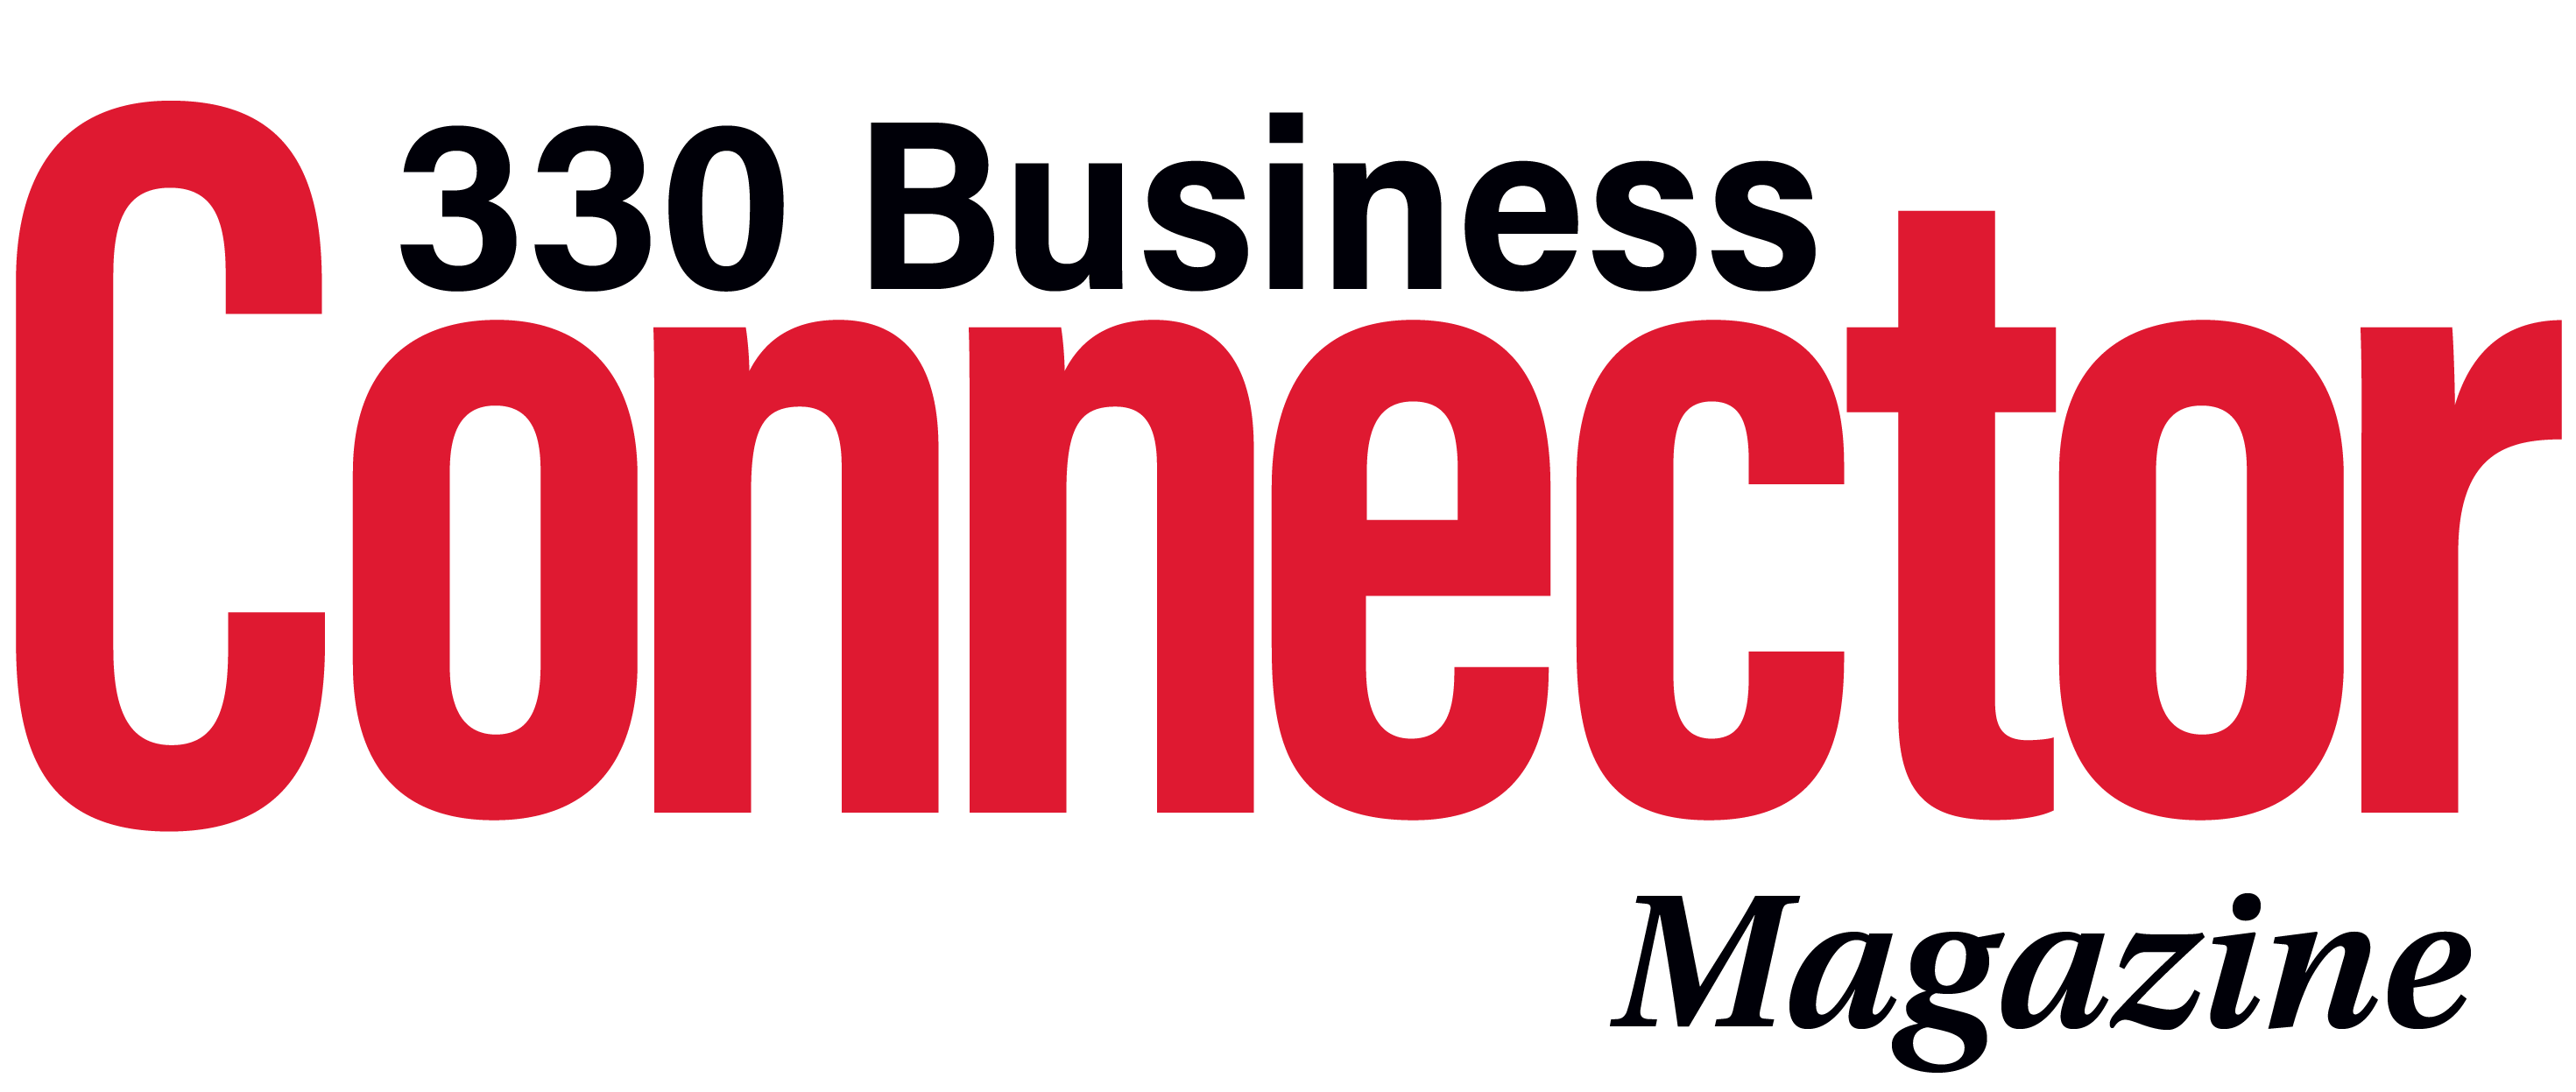 The 330 Business Connector